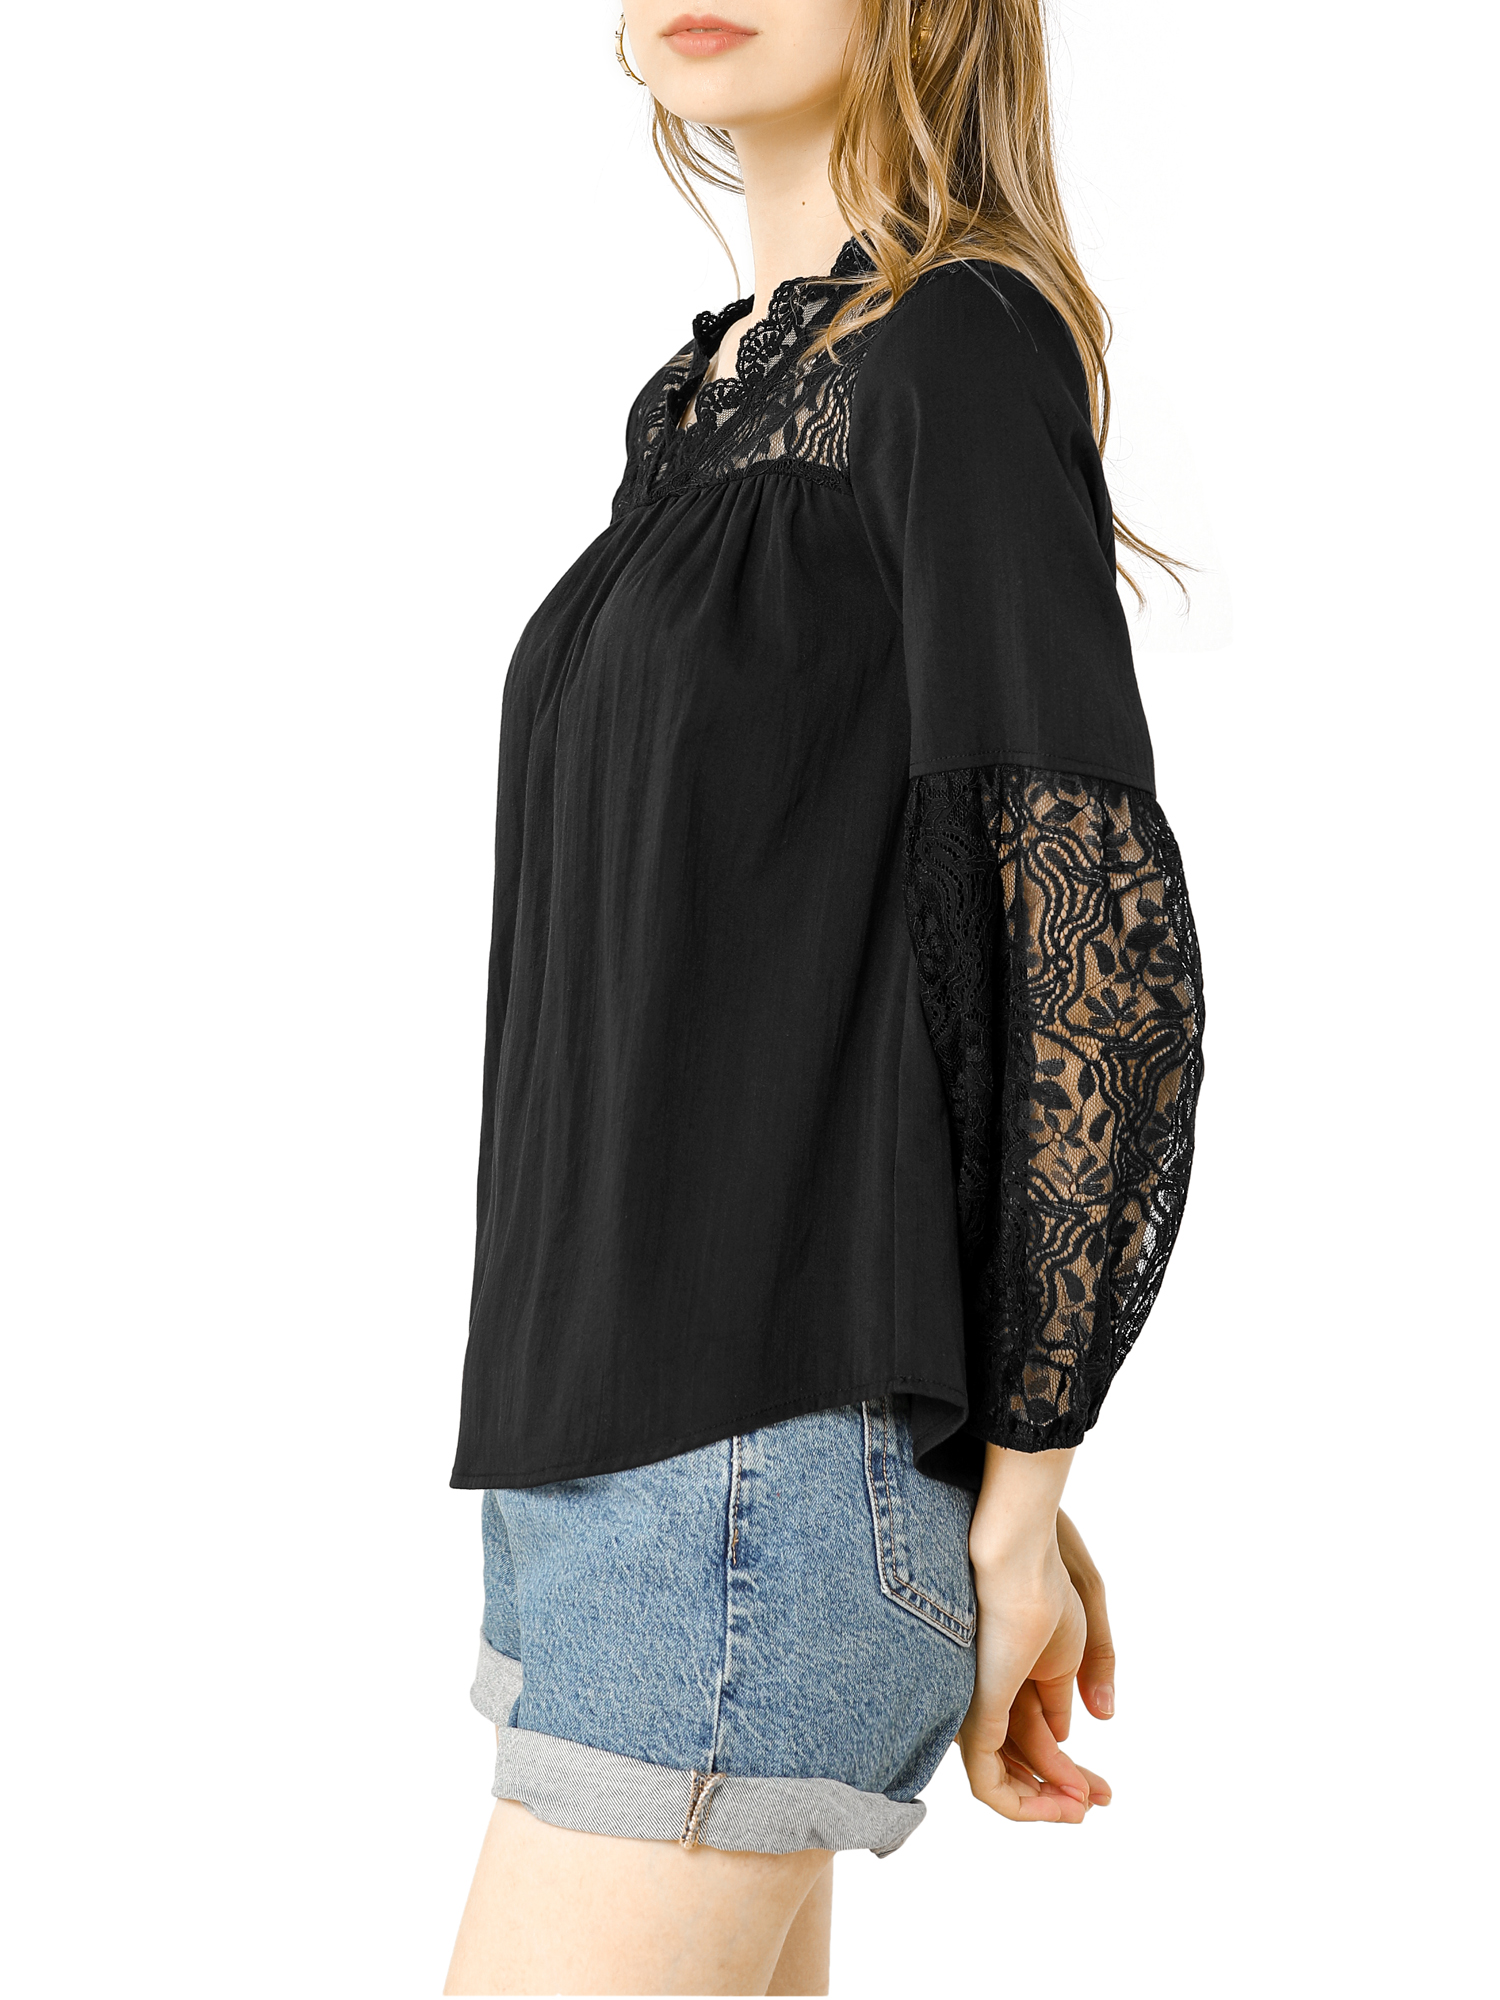 Women's Lace Floral Peasant Patchwork Long Puff Sleeve V Neck Blouse - image 4 of 6